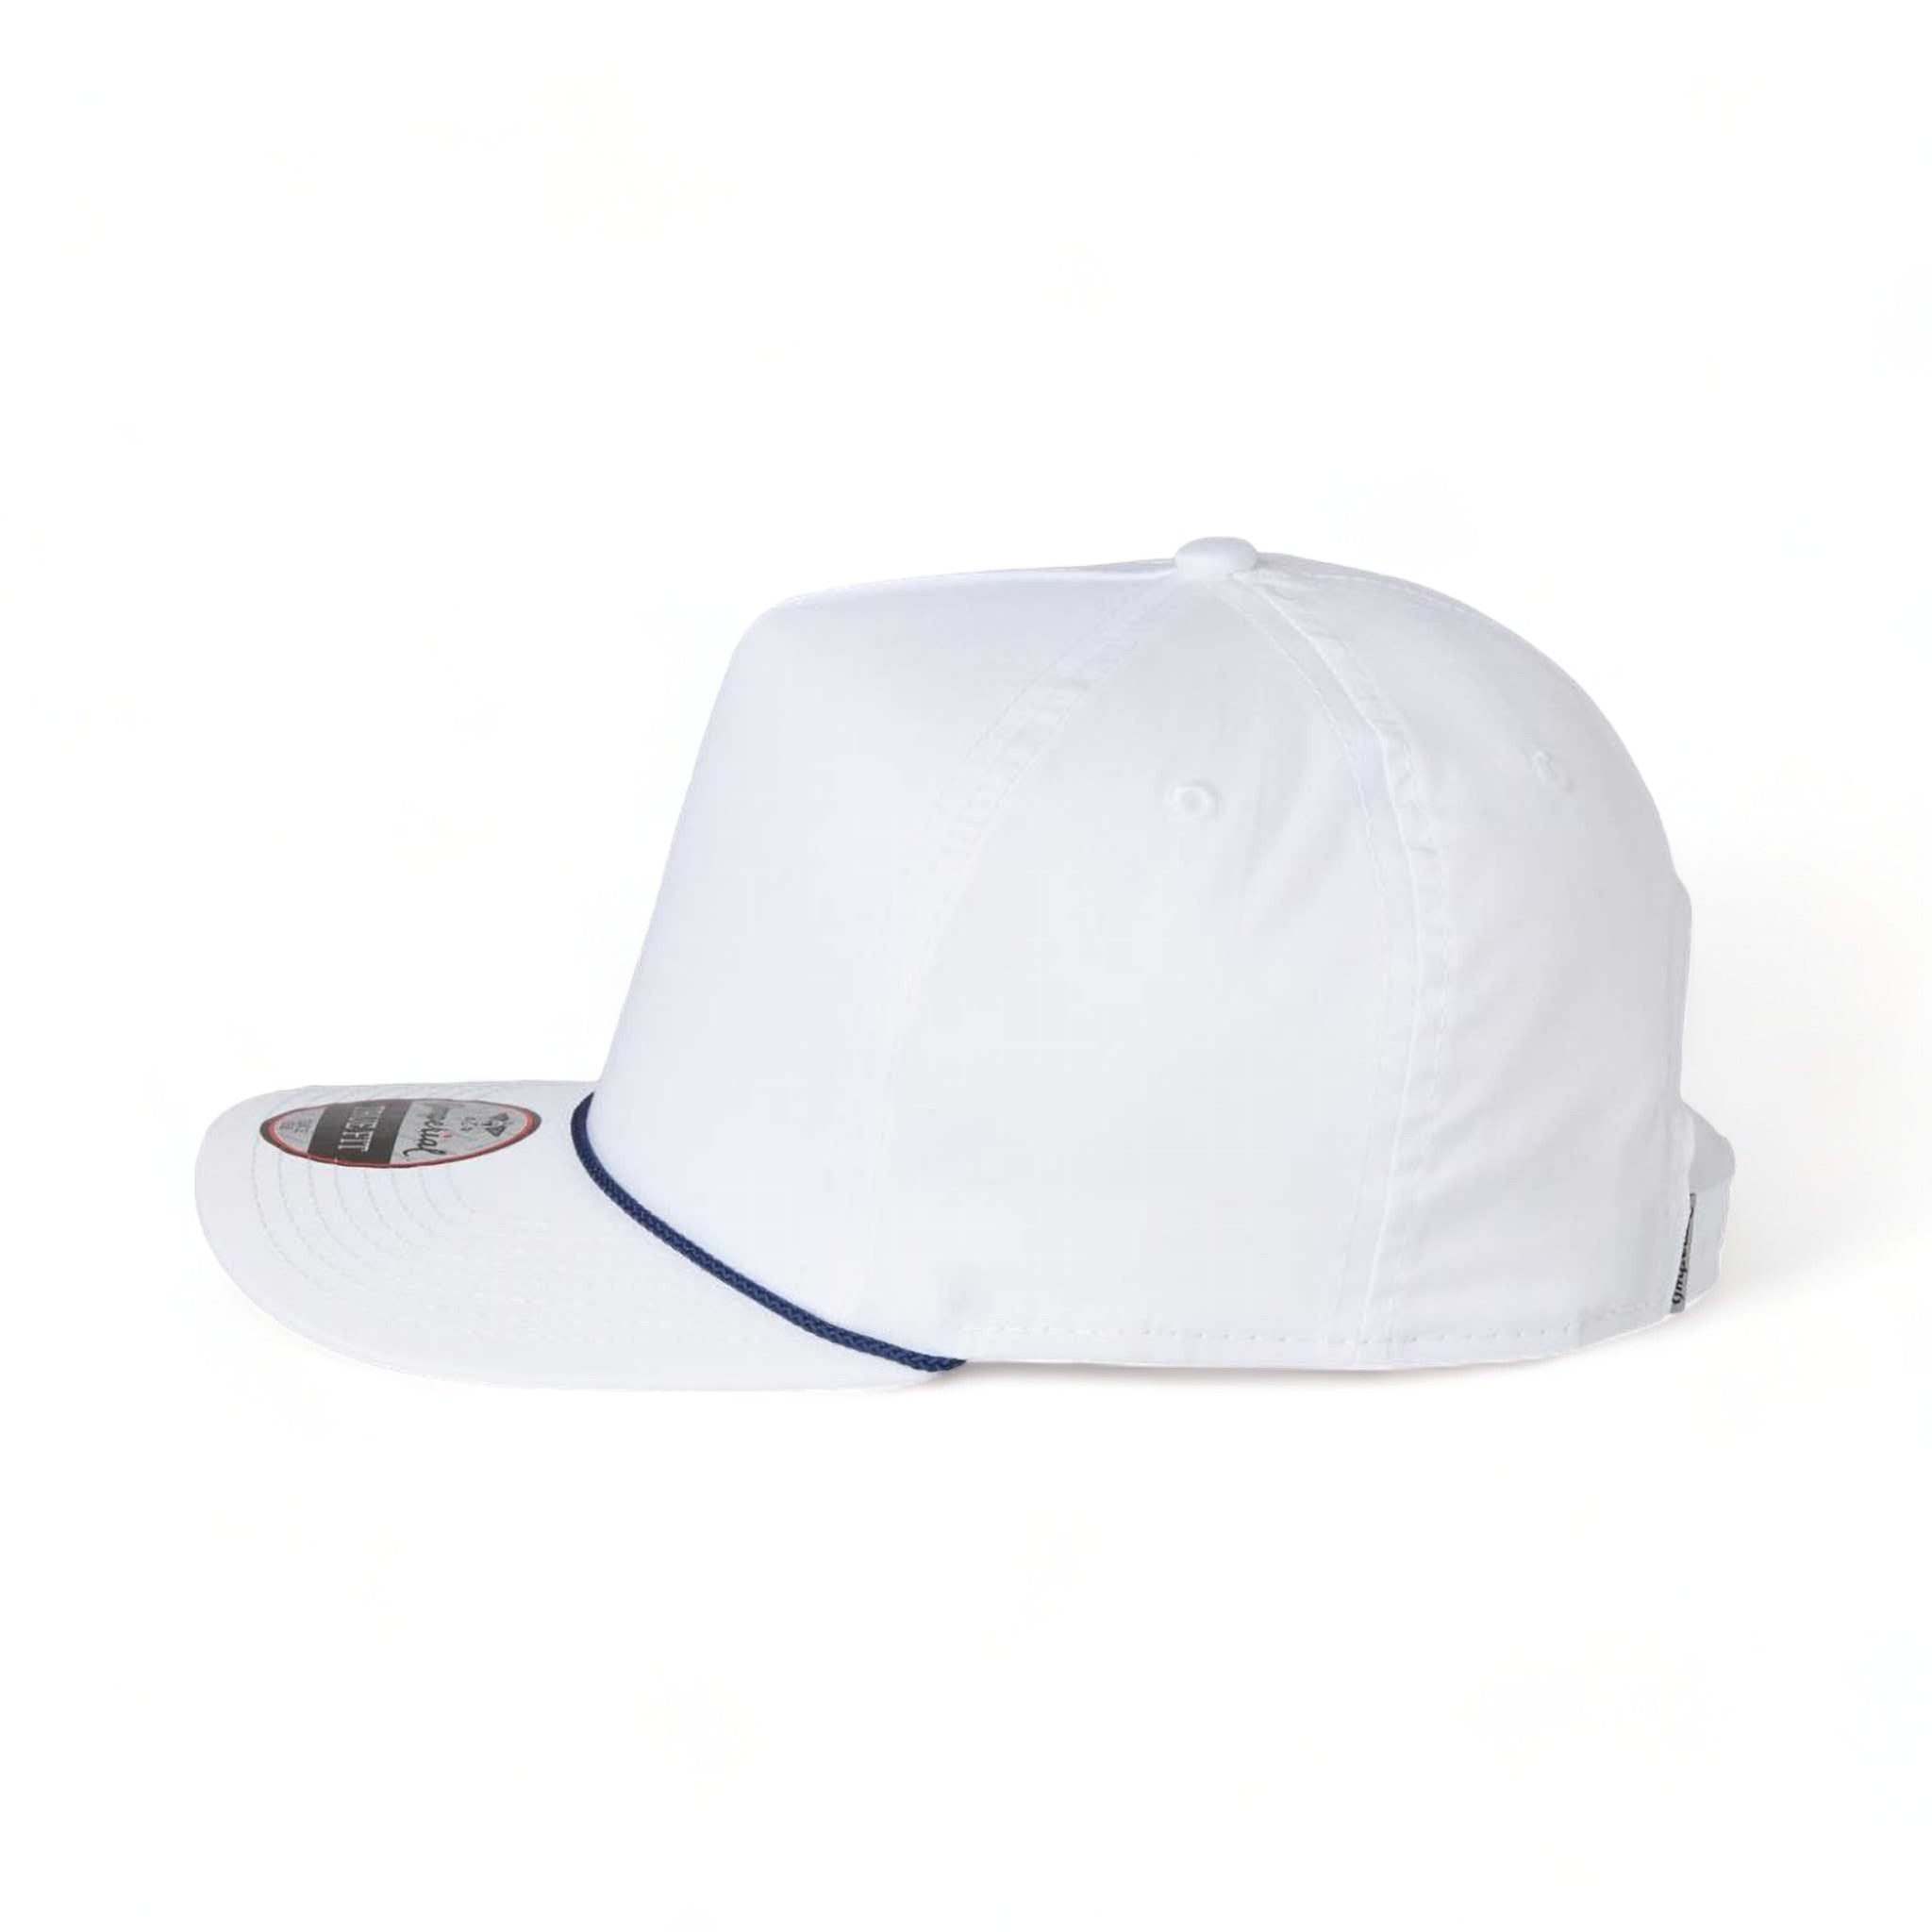 Side view of Imperial 5056 custom hat in white and navy